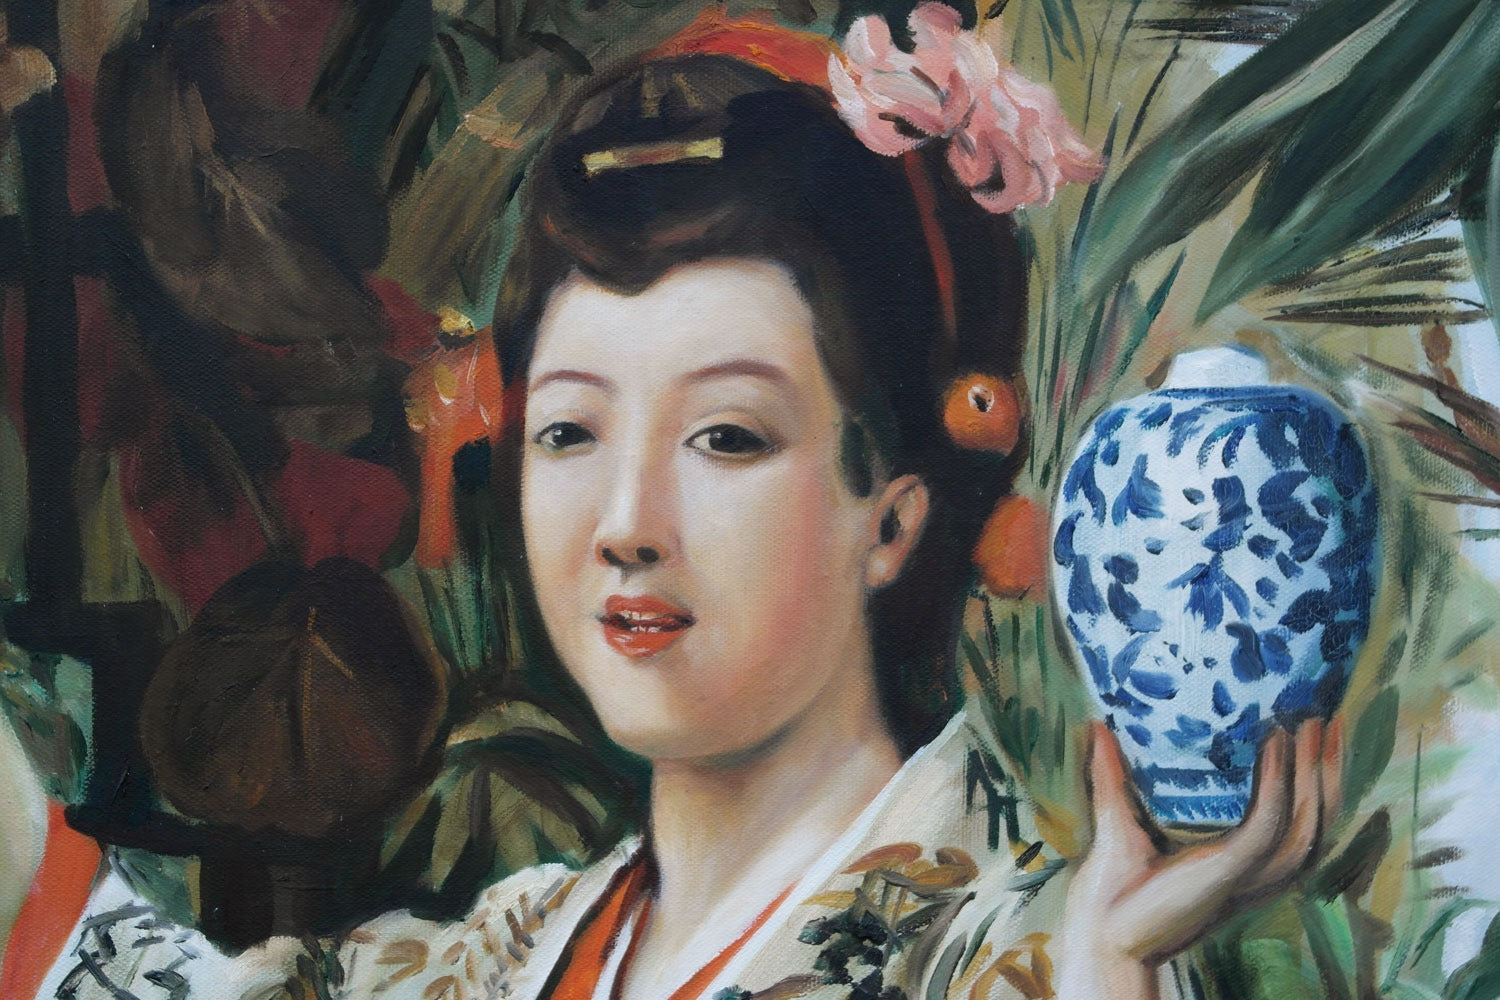 Young Lady Holding Japanese Objects in style of James Tissot